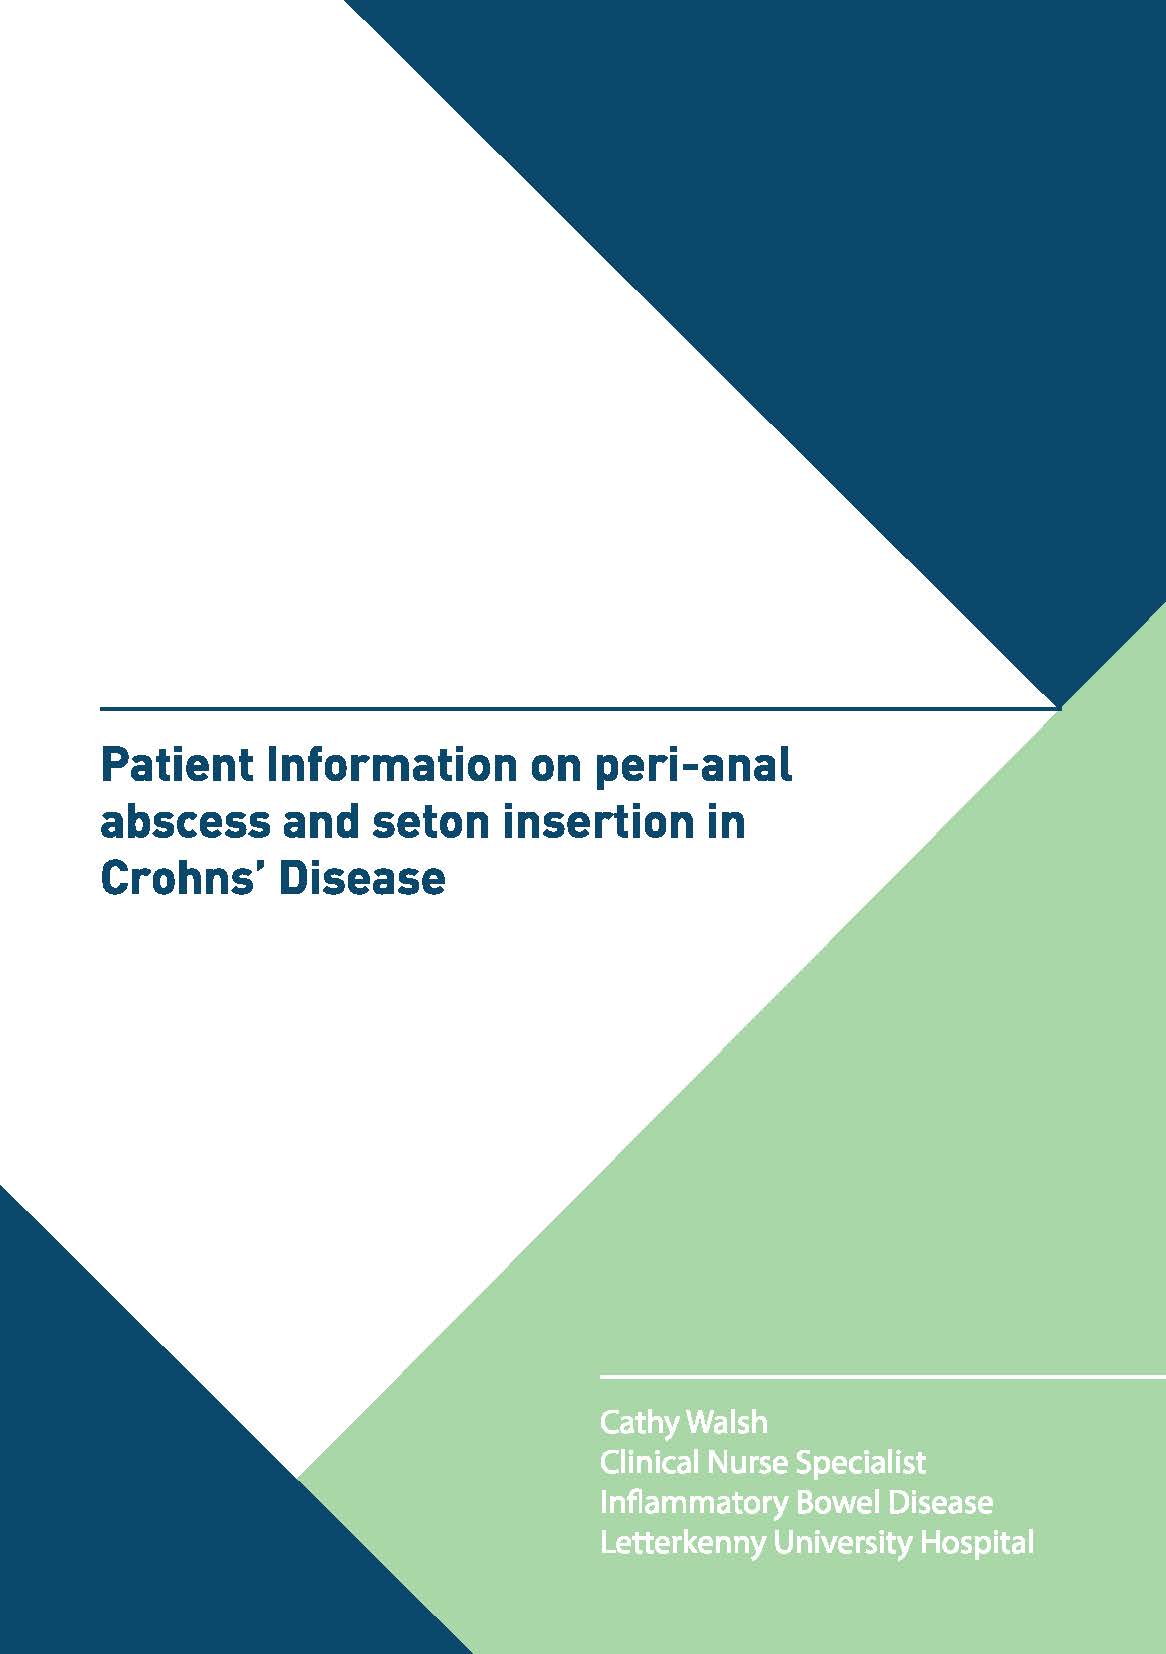 Patient Information on peri-anal abscess and seton insertion in Crohn's Disease